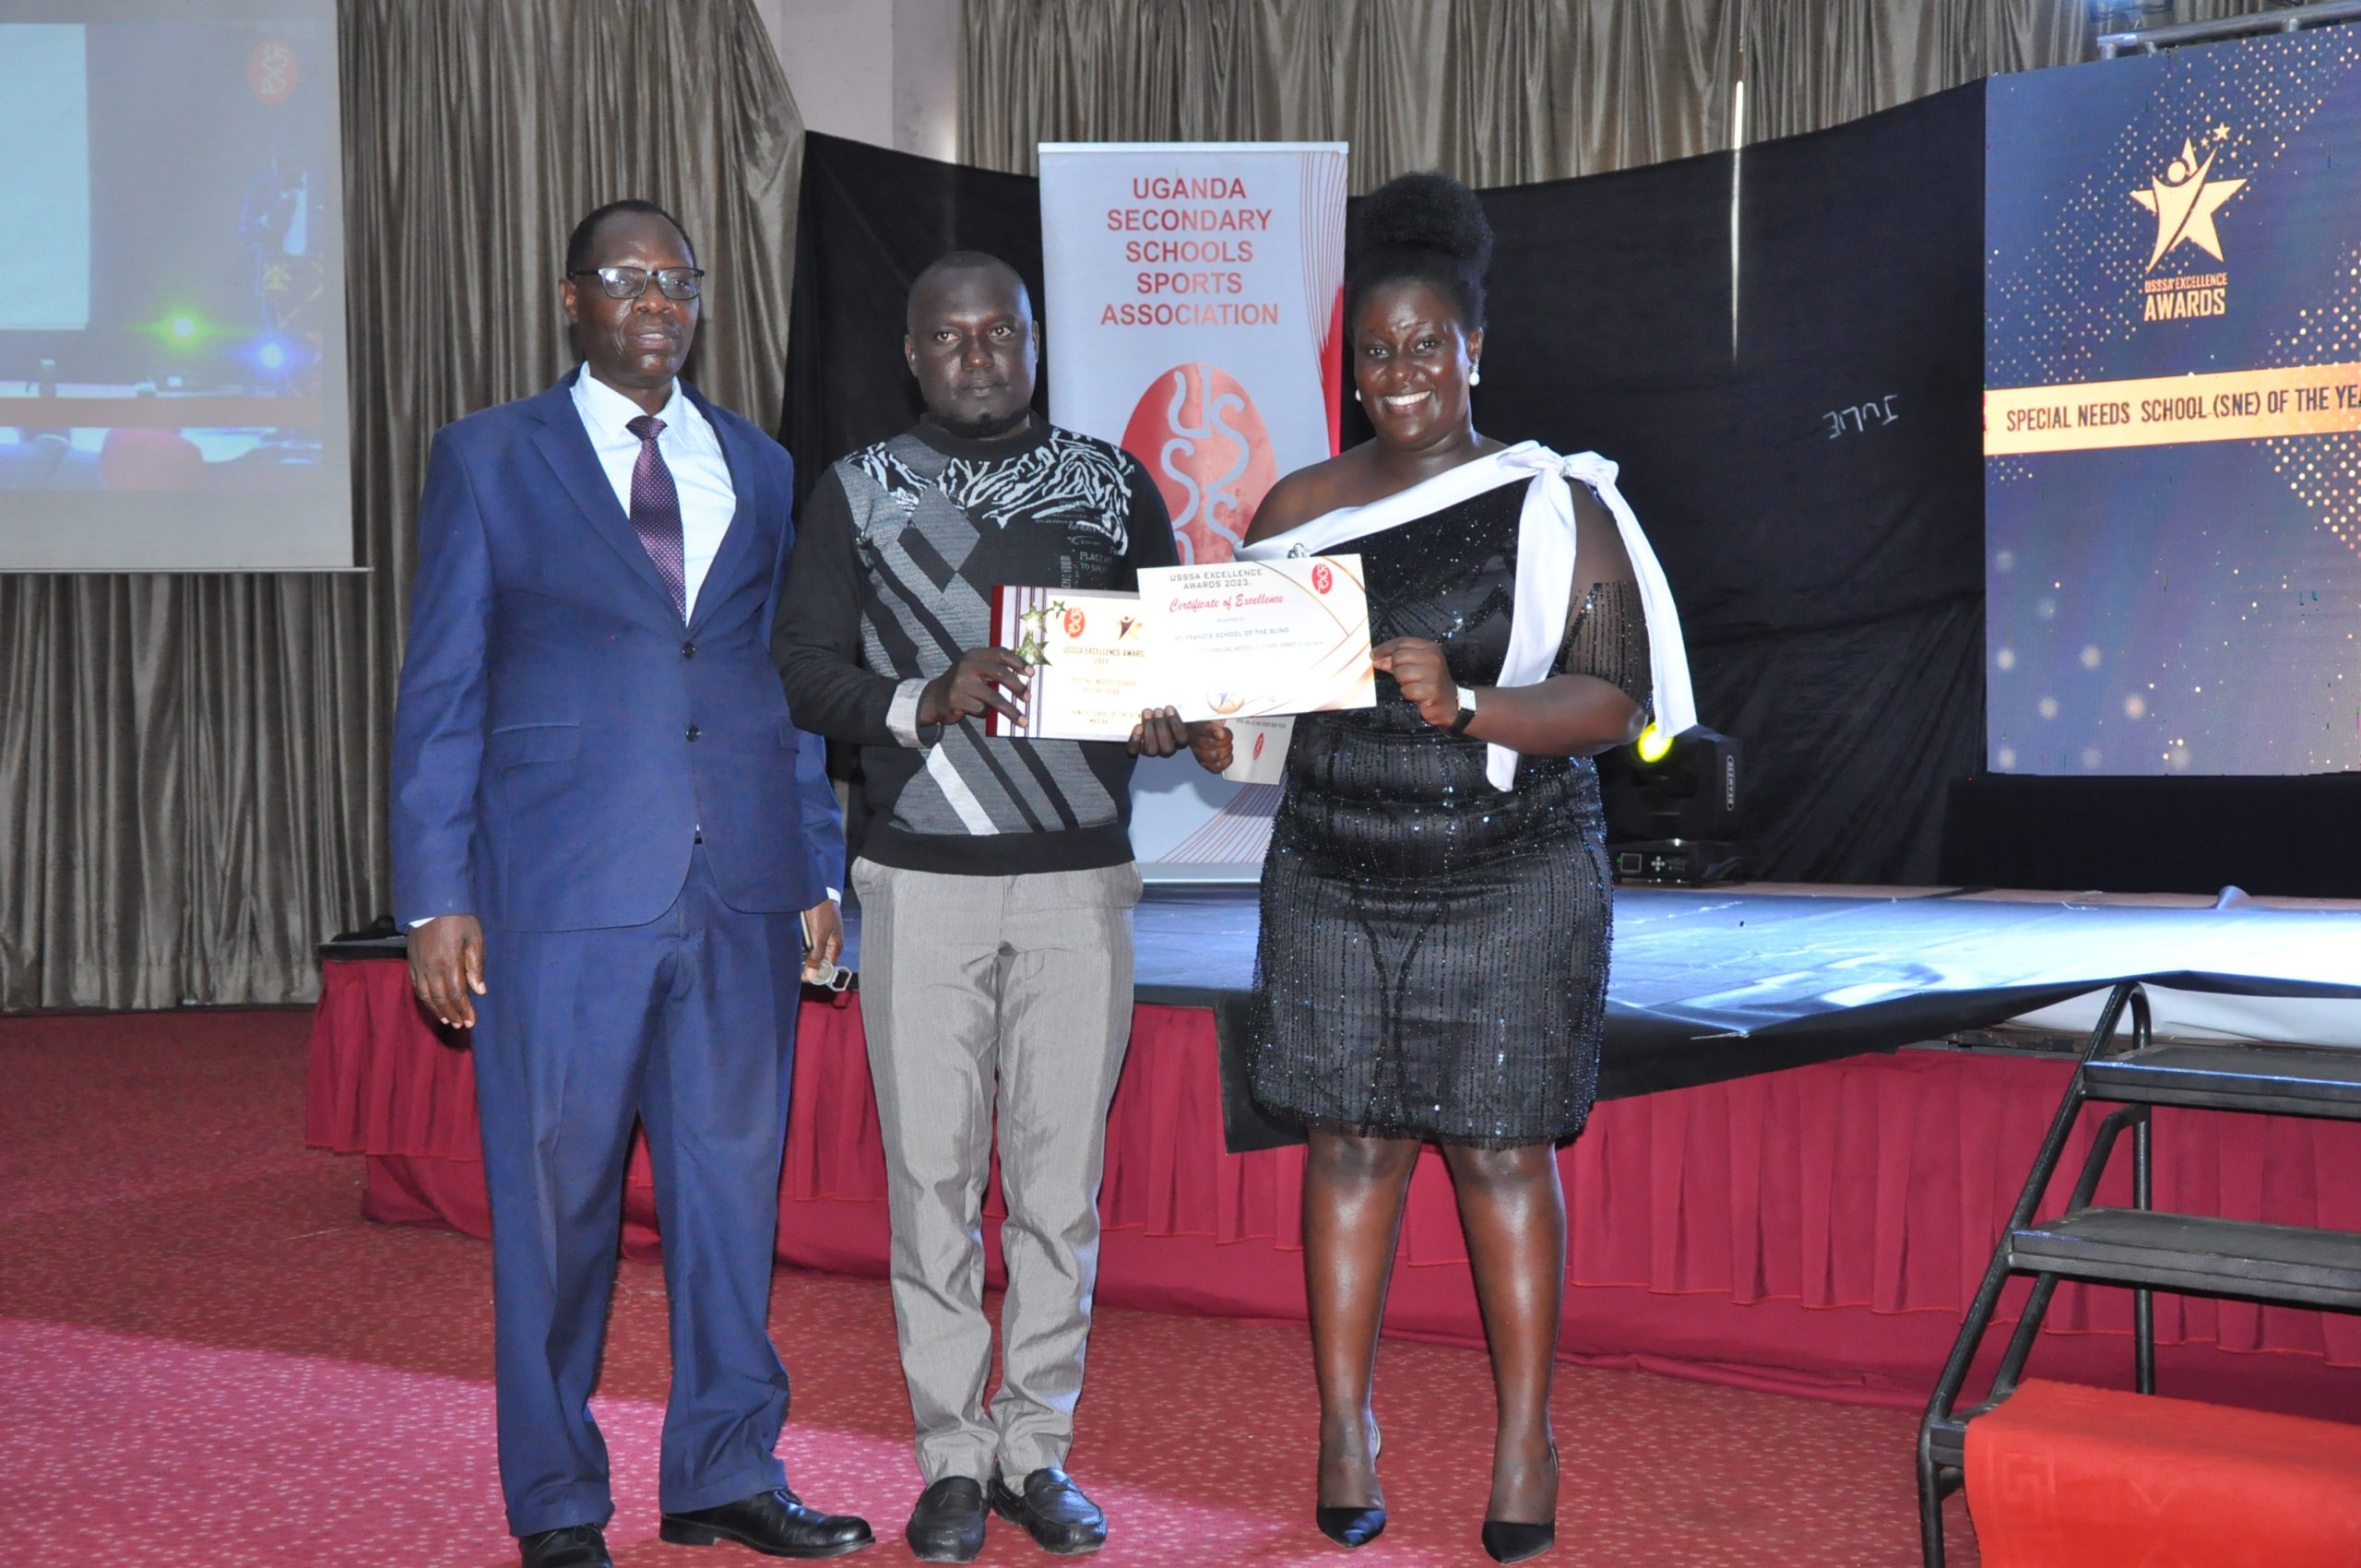 Kitende named school of the year as St. Noa, Kibuli win big at USSSA excellent awards